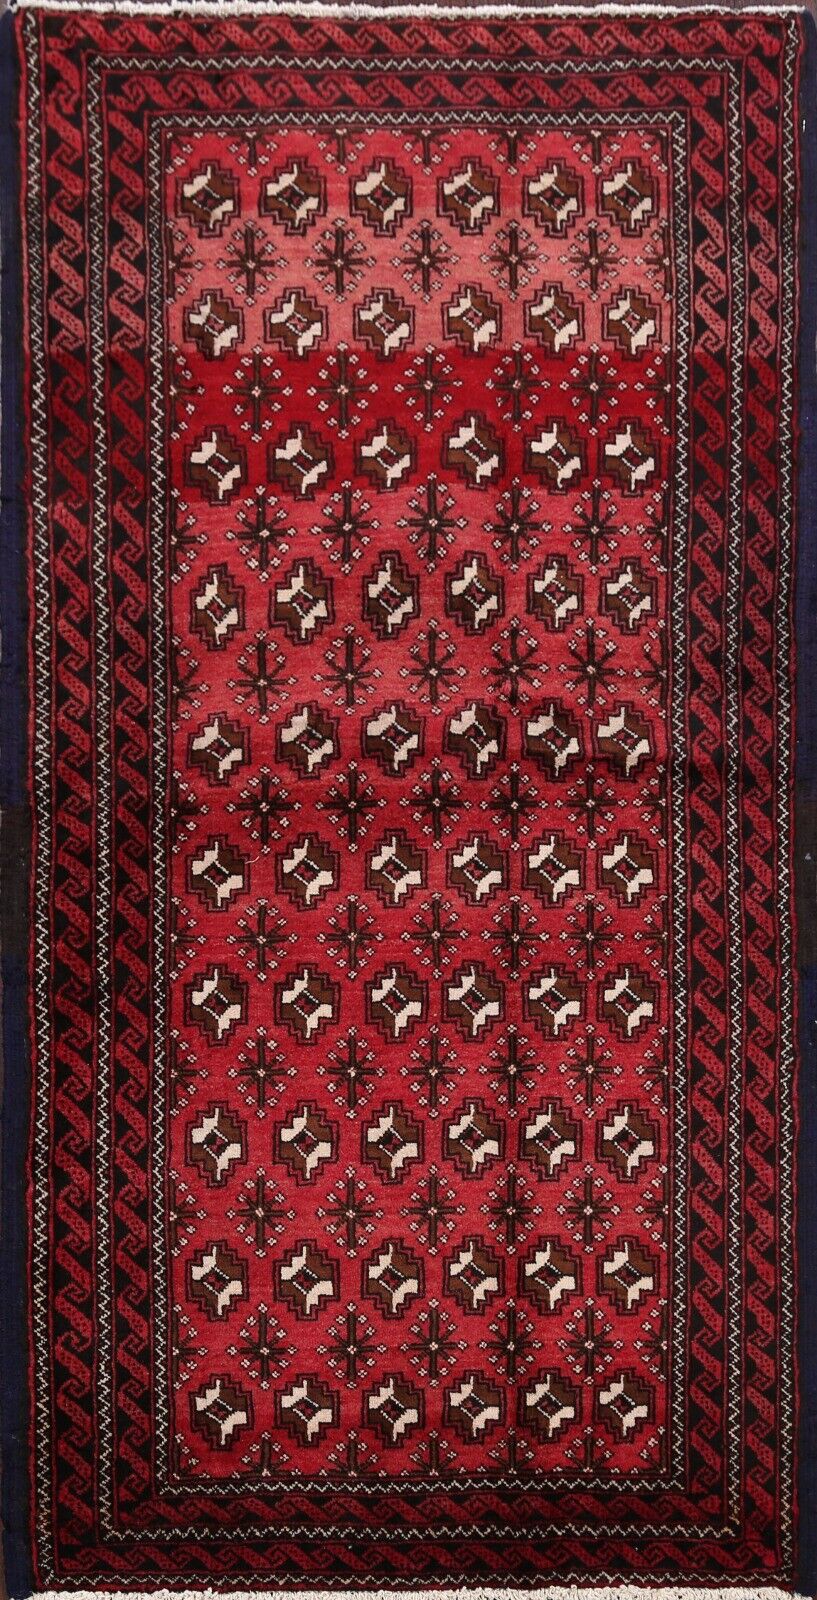 Vintage Geometric Balouch Afghan Oriental Area Rug Hand-knotted Wool Carpet 3x5